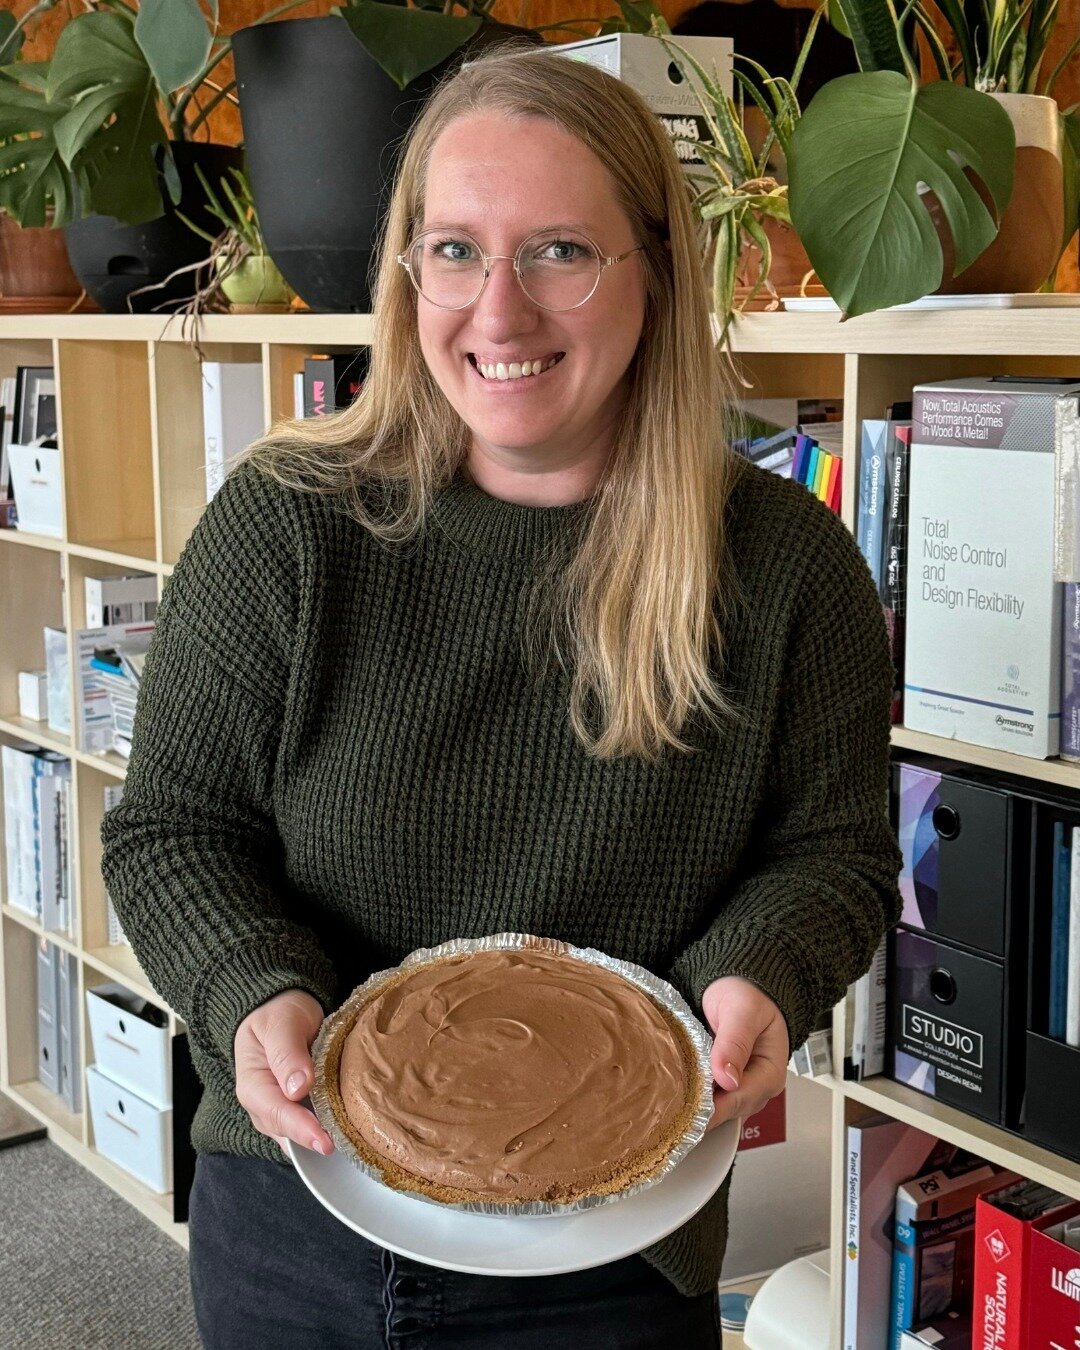 Happy PI Day! 🥧
We are celebrating double today with both a pizza pie from @empireslicehousetulsa and a homemade pie from our very own Beth! Are you grabbing a slice today?

#PIDay #HappyPIDay #MethodGroup #OfficeFun #ModernArchitecture